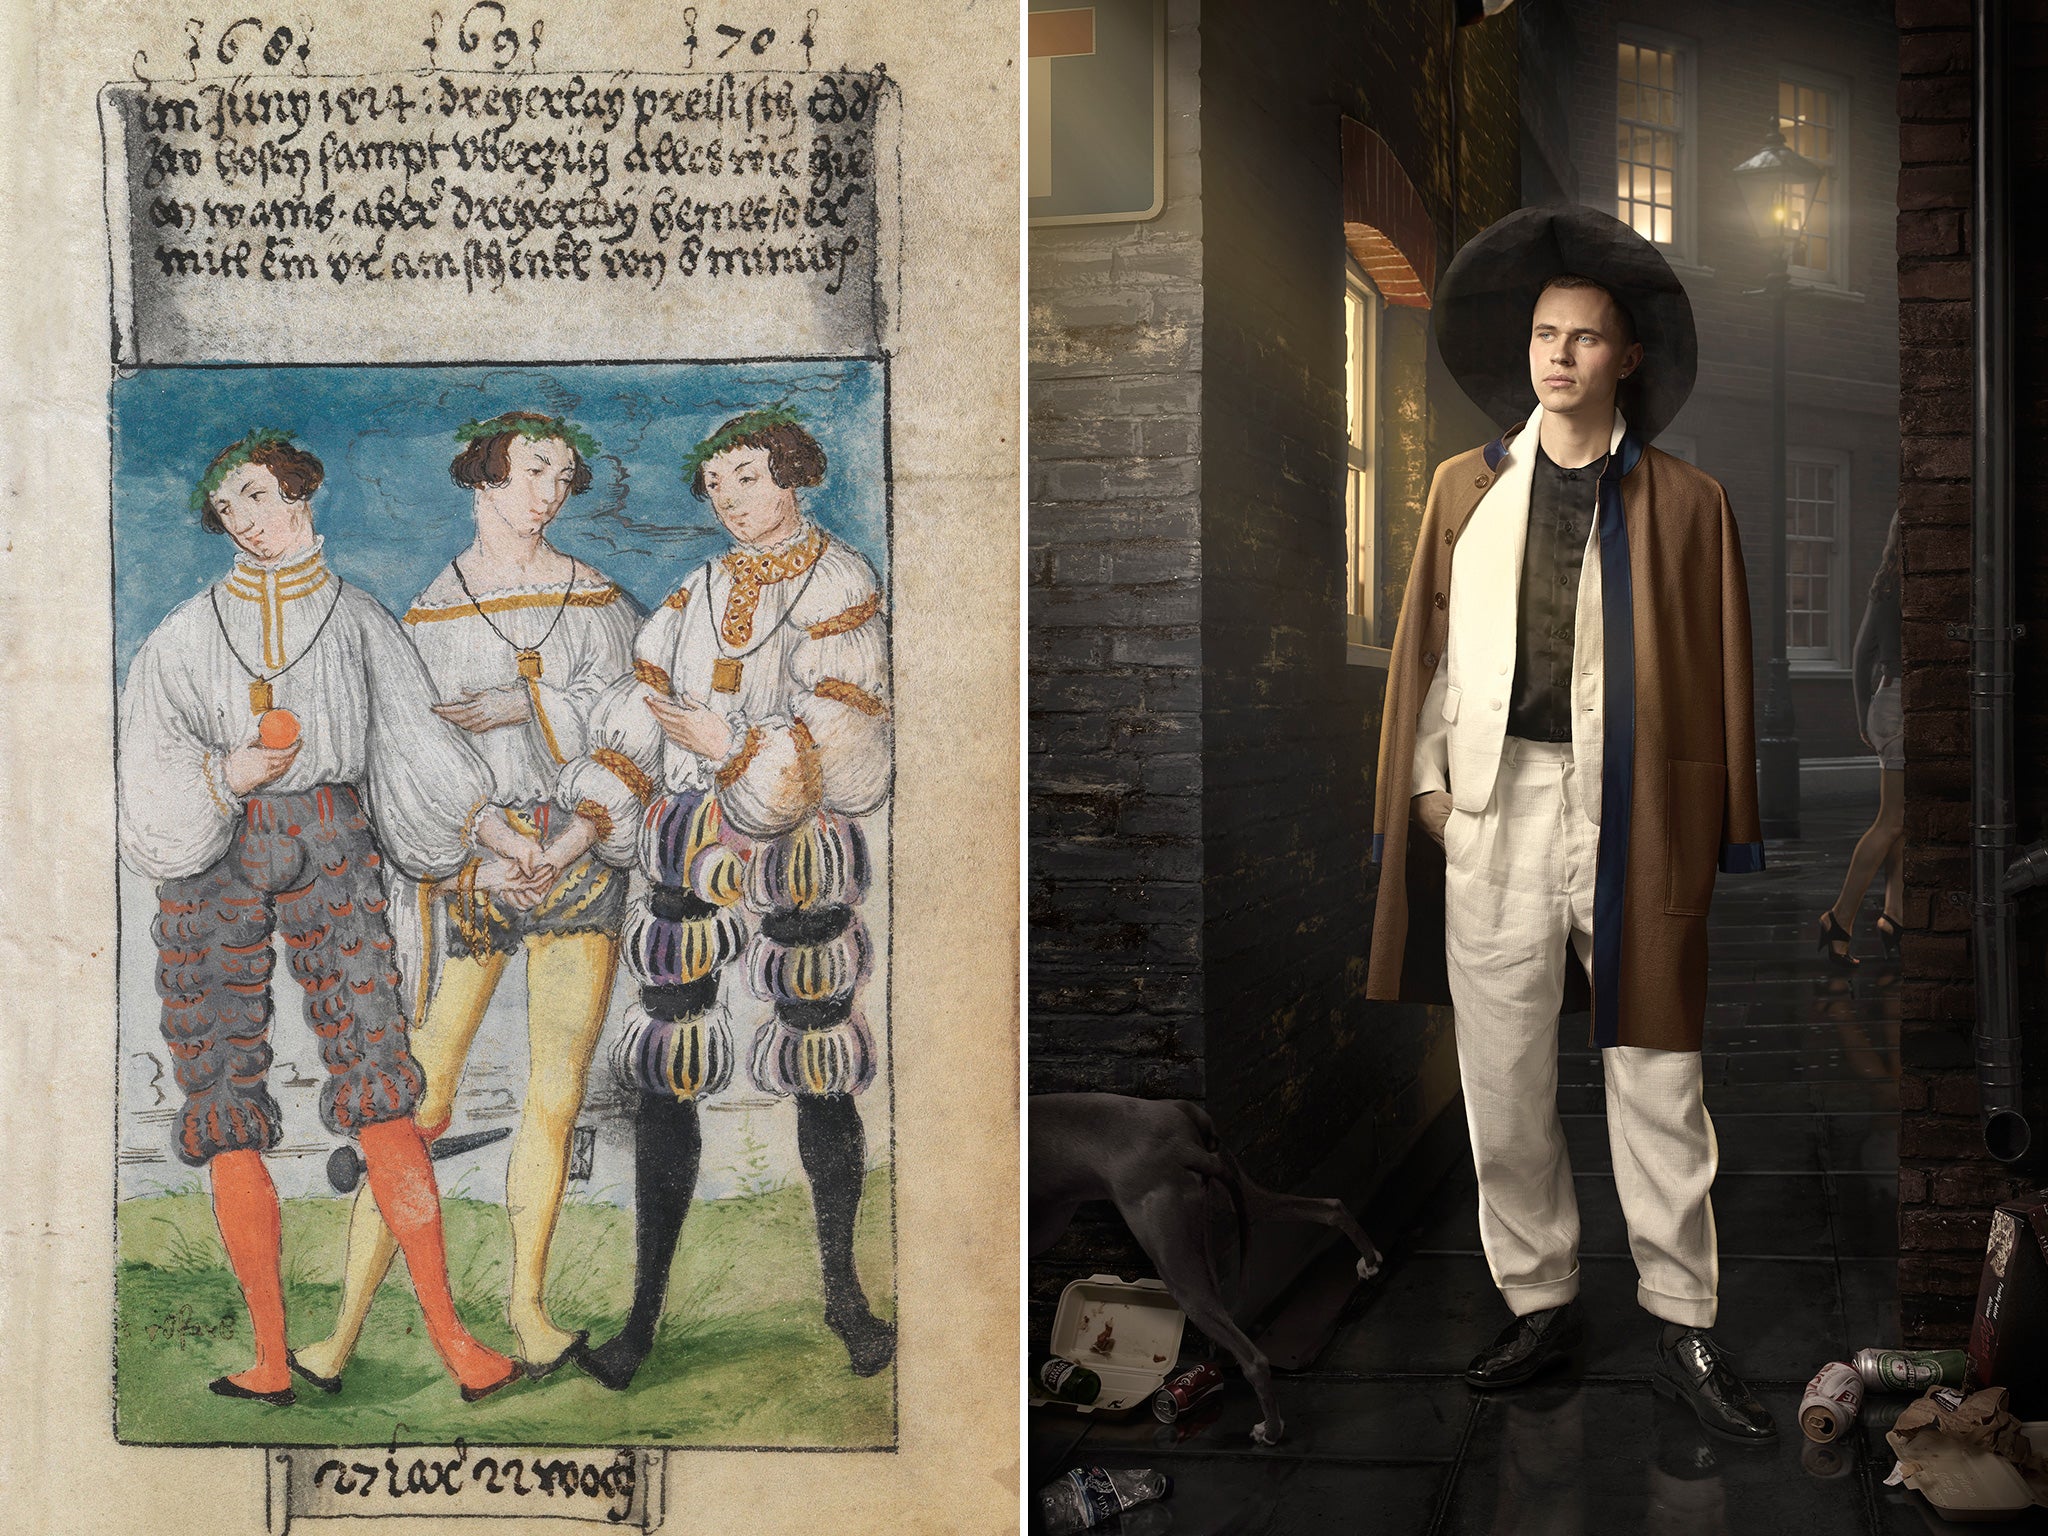 'The First Book on fashion', commissioned by 16th-century accountant Matthäus Schwarz, has inspired a new set of photographs of fictional male dandies, by artist-photographer Maisie Broadhead